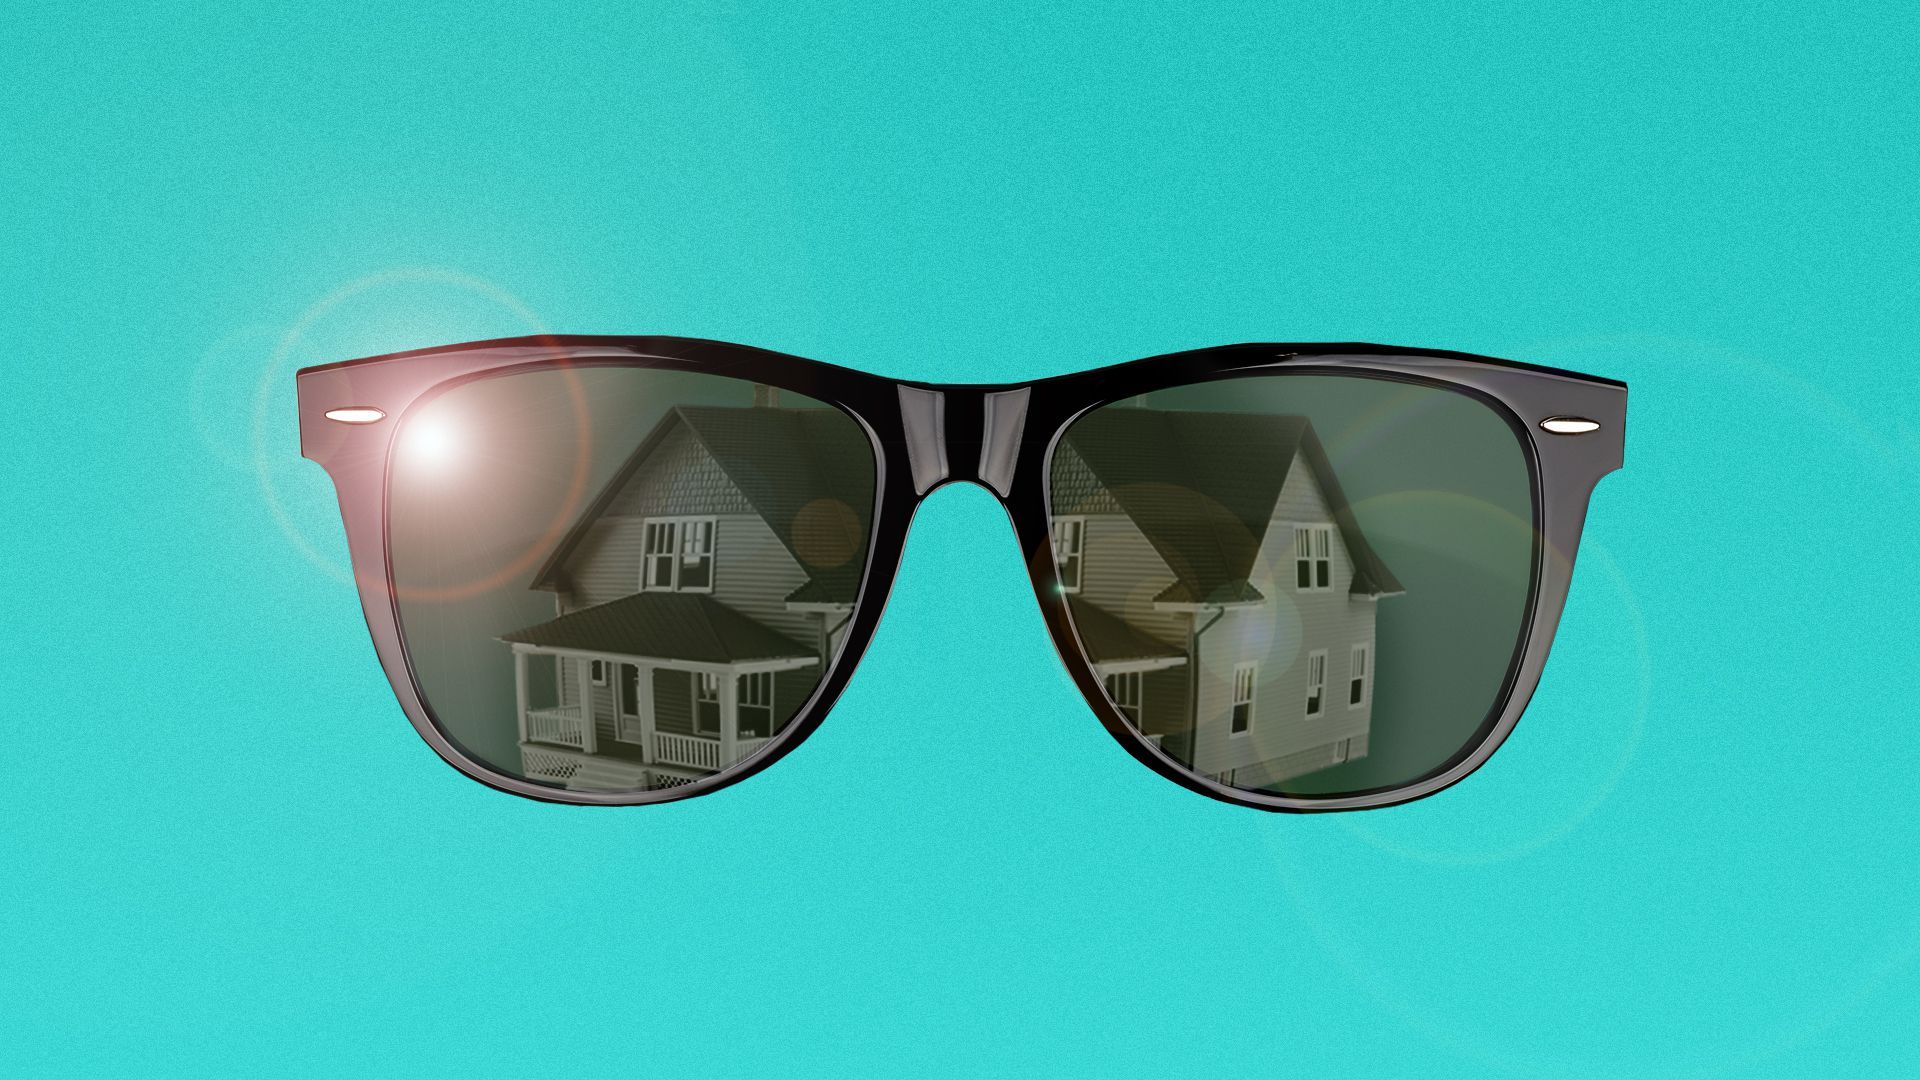 Illustration of a pair of sunglasses with a house reflecting in the lenses